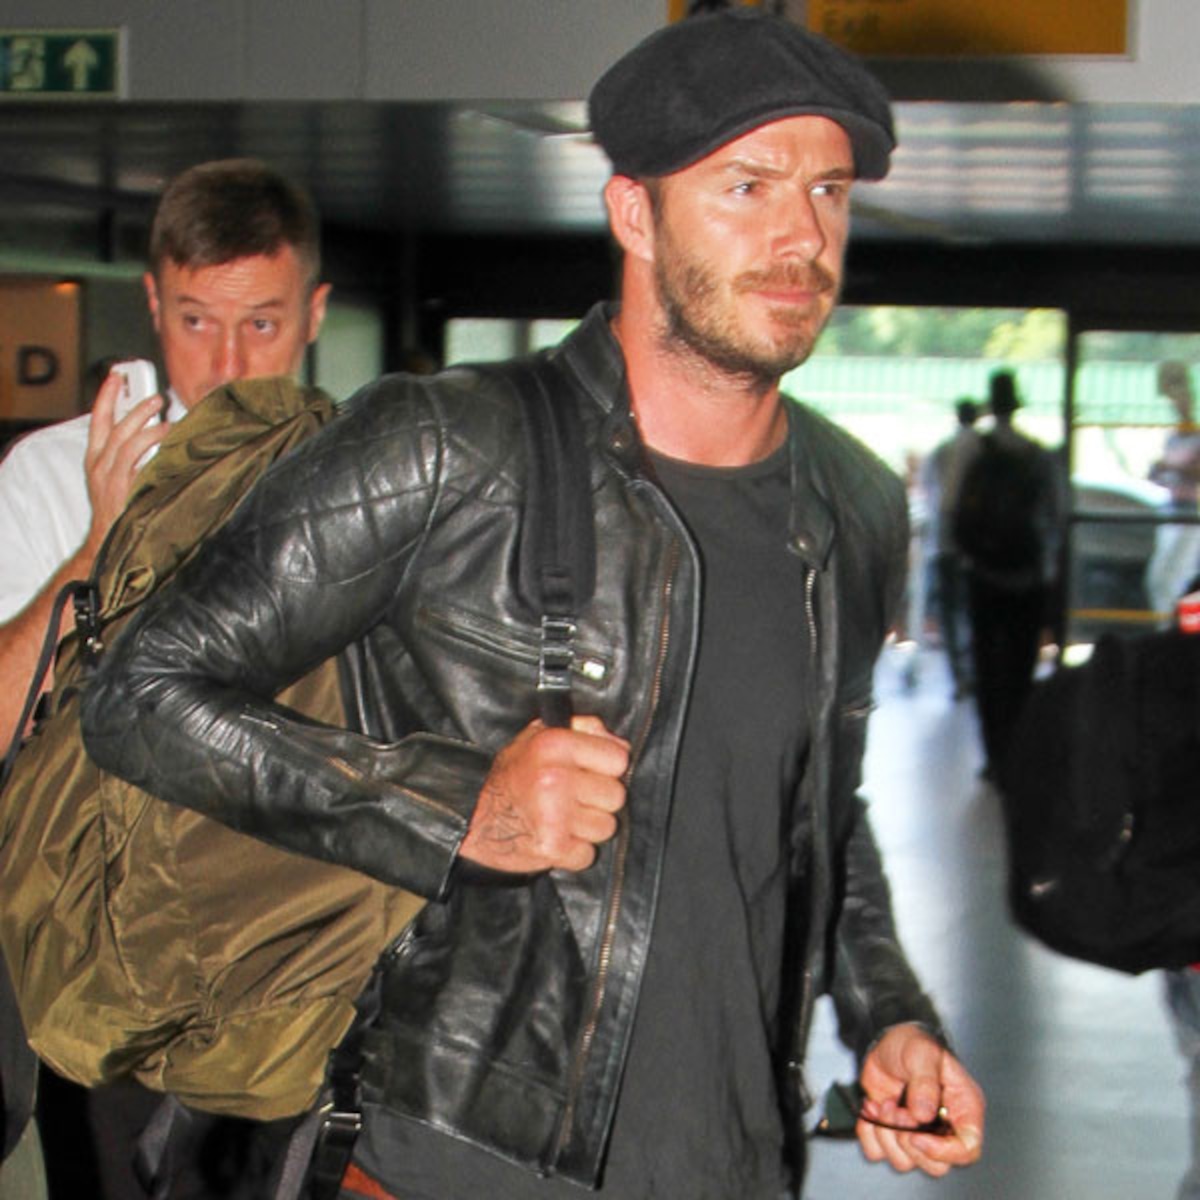 David Beckham Departs Rio After Spending 14 Days Filming in the